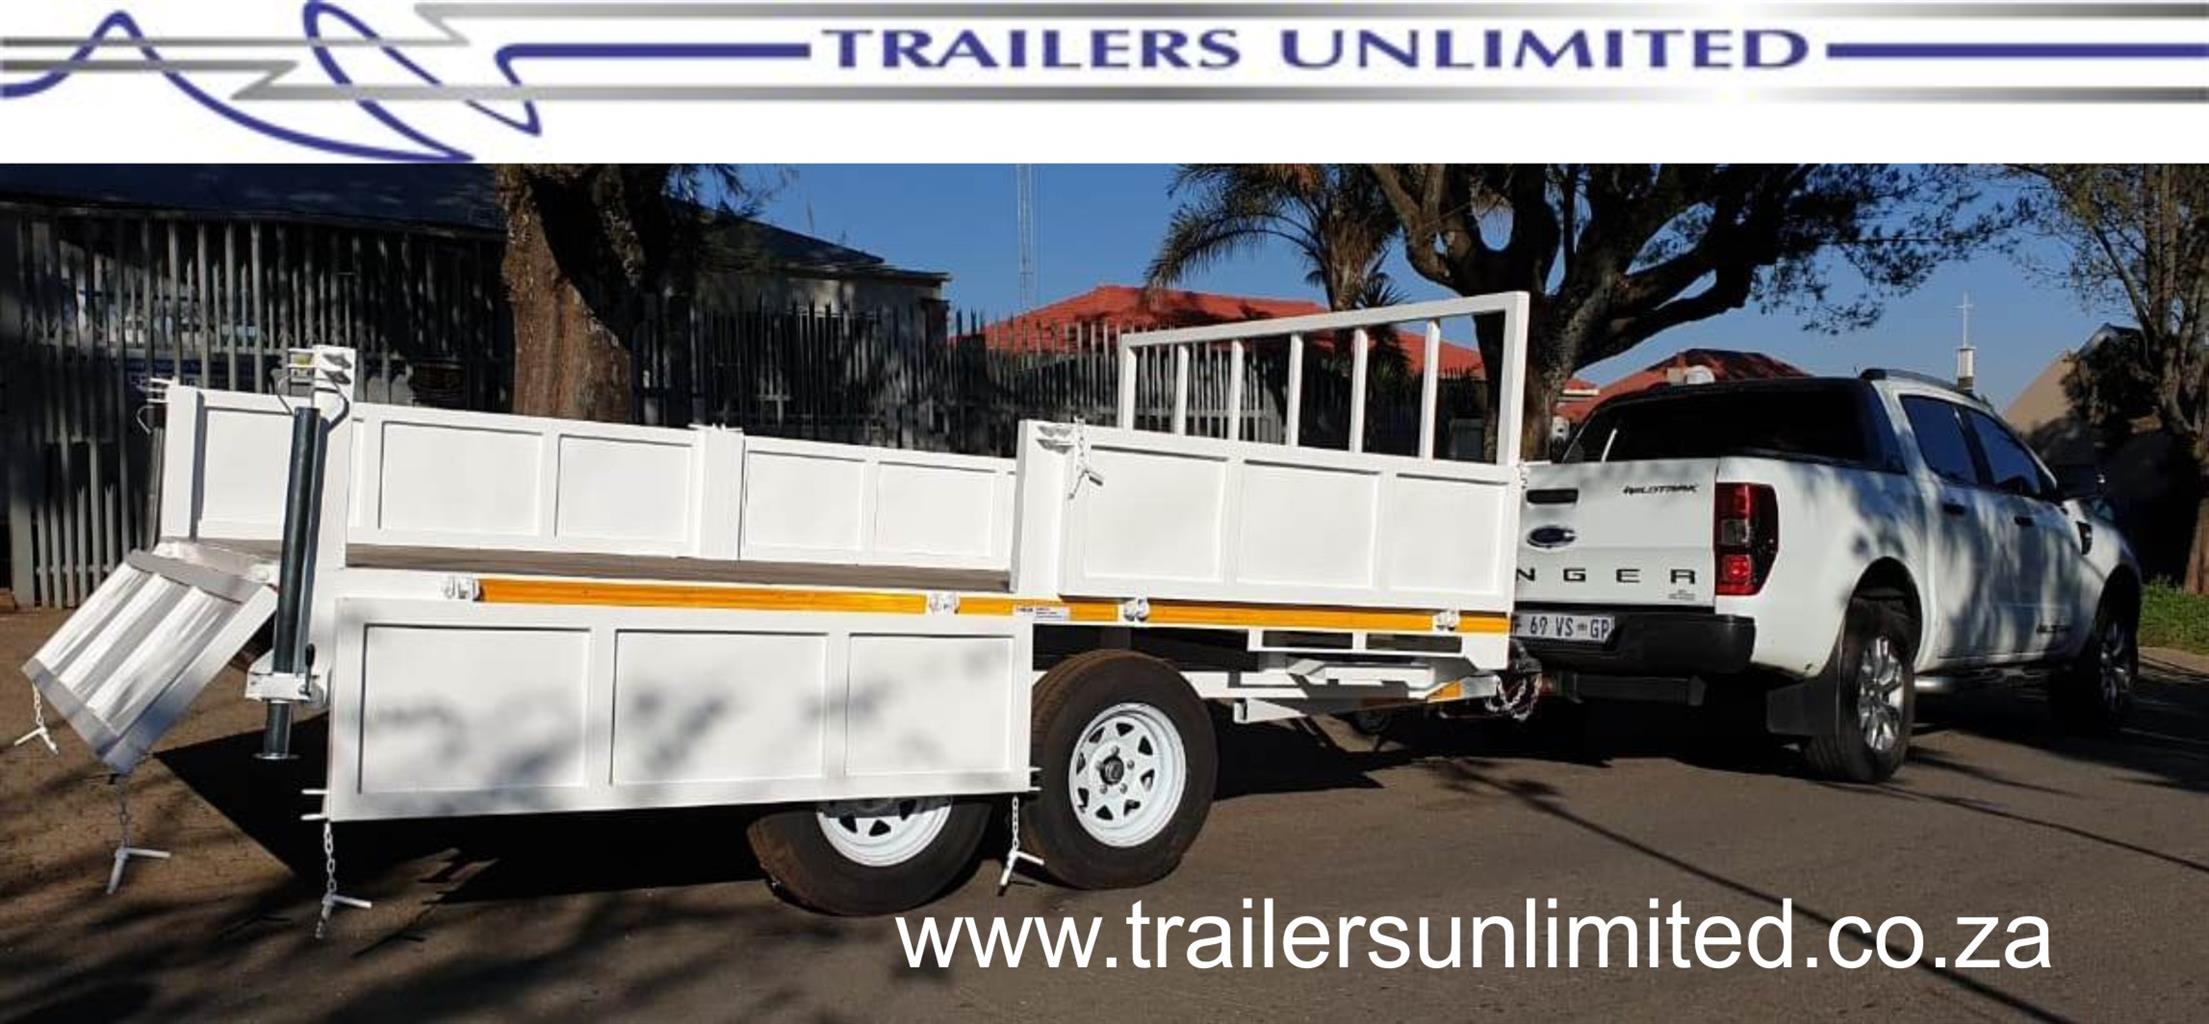 TRAILERS UNLIMITED FLATBED TRAILER